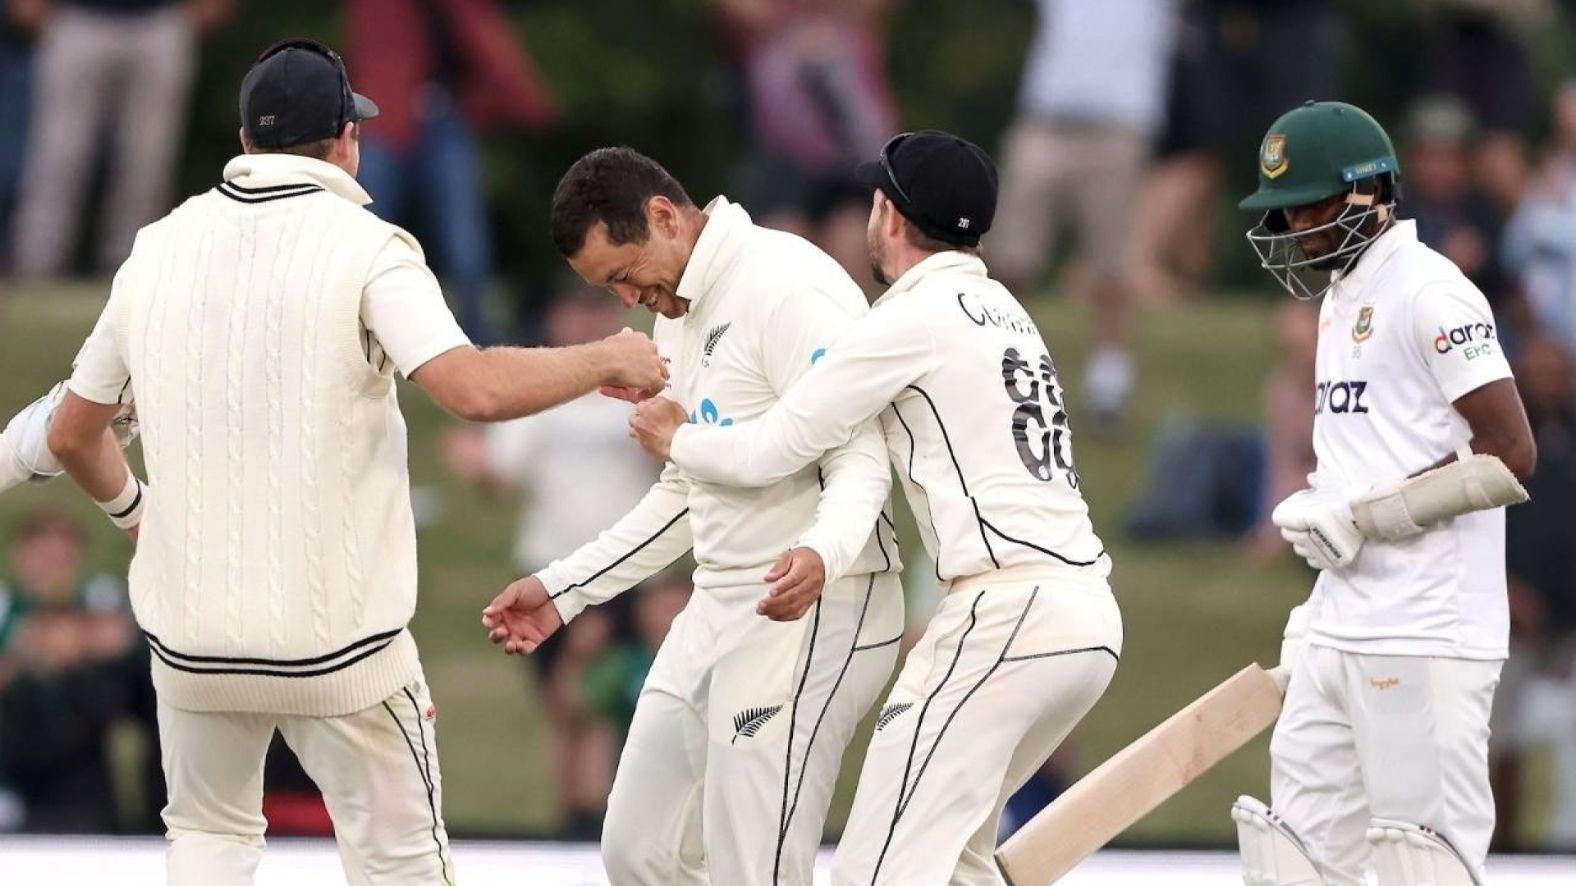 He inspired a generation of kids and I was one of them: Tom Latham on Ross Taylor’s influence